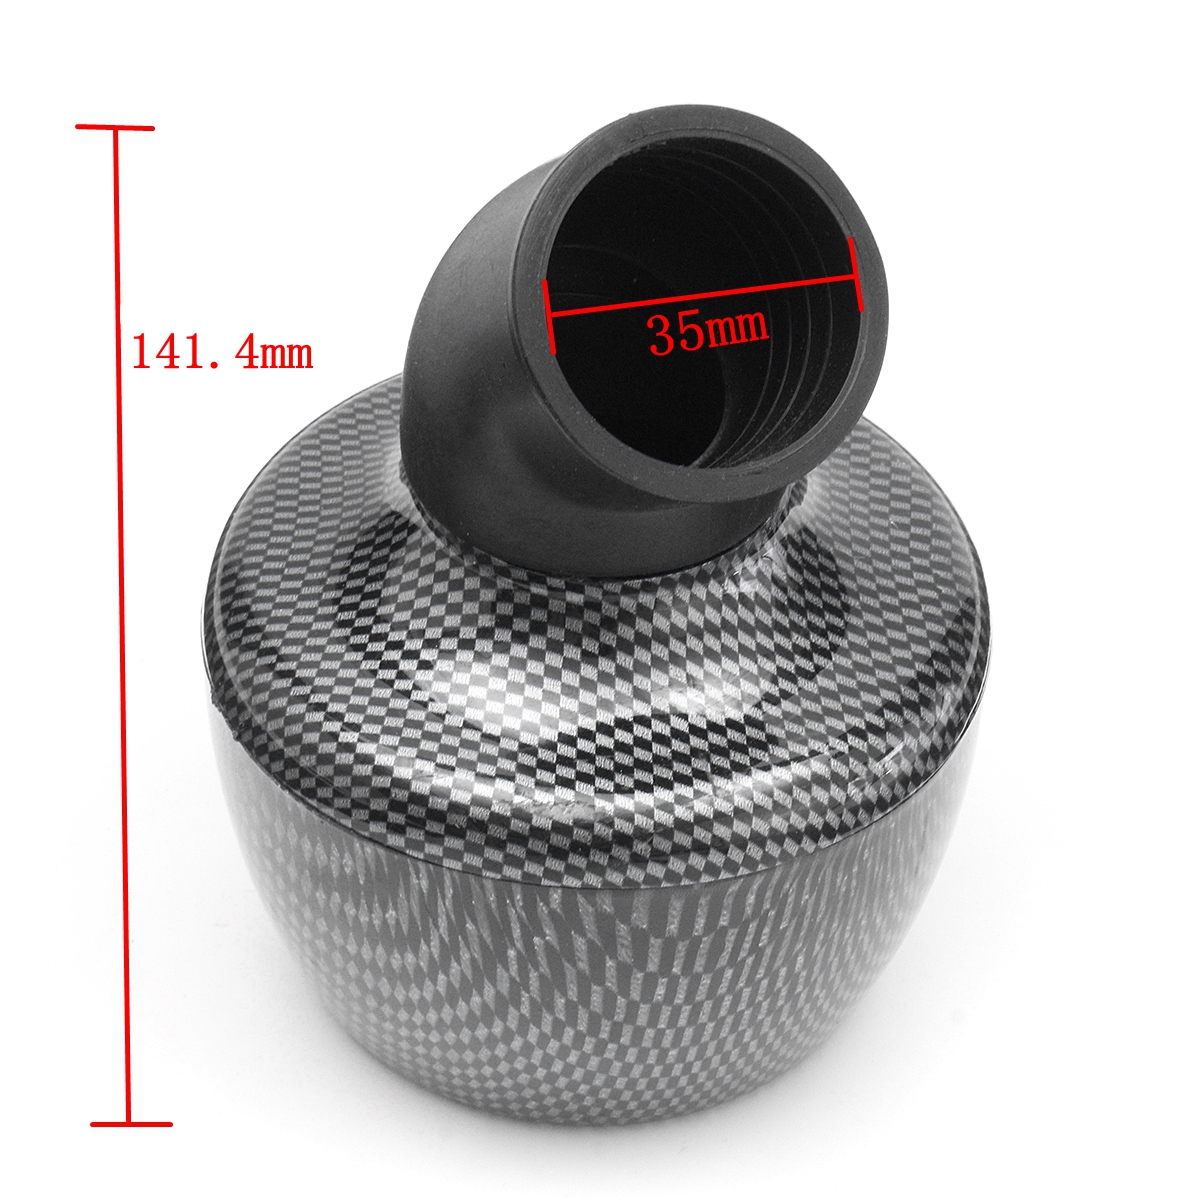 35mm-Air-Filter-For-Motorcycle-150cc-250cc-GY6-Scooter-Moped-Dirt-Bikes-ATV-Go-Kart-1174967